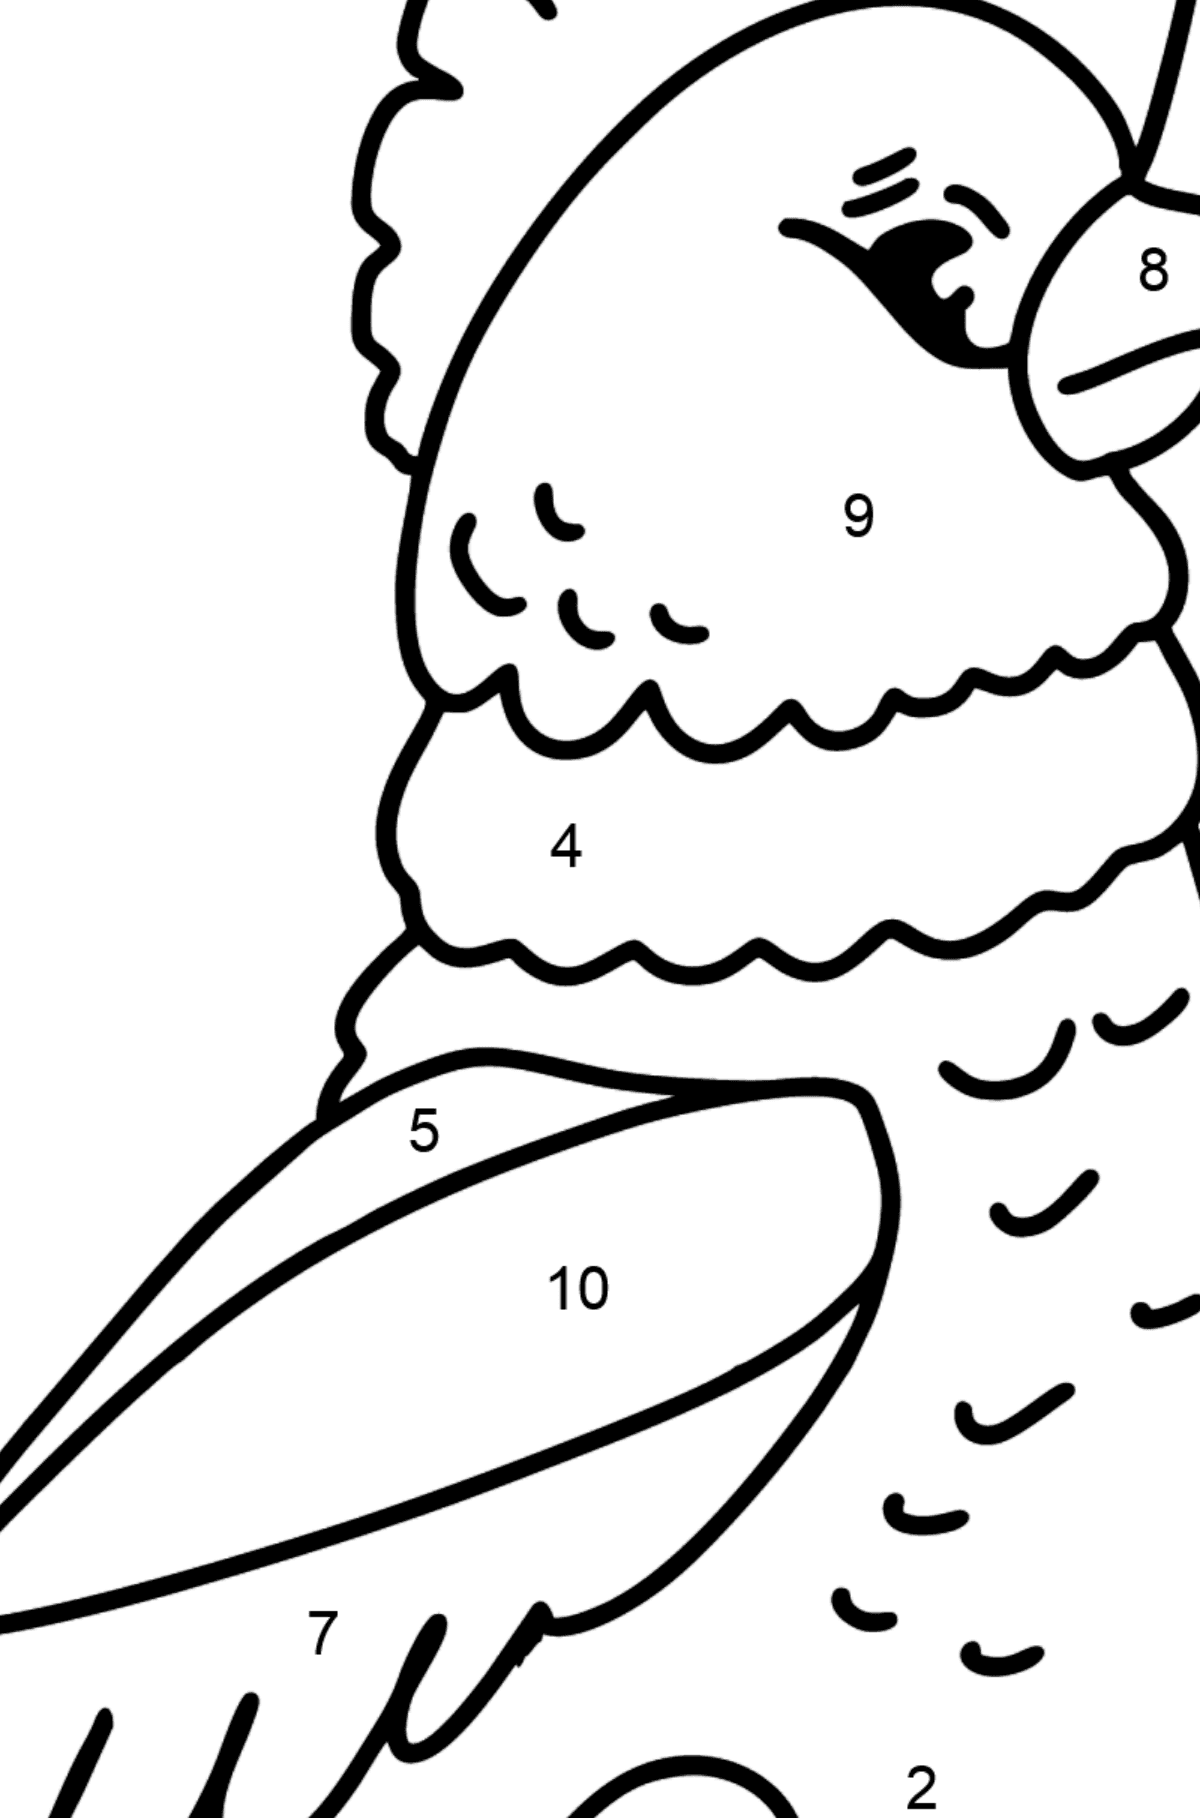 Cockatoo coloring page - Coloring by Numbers for Kids